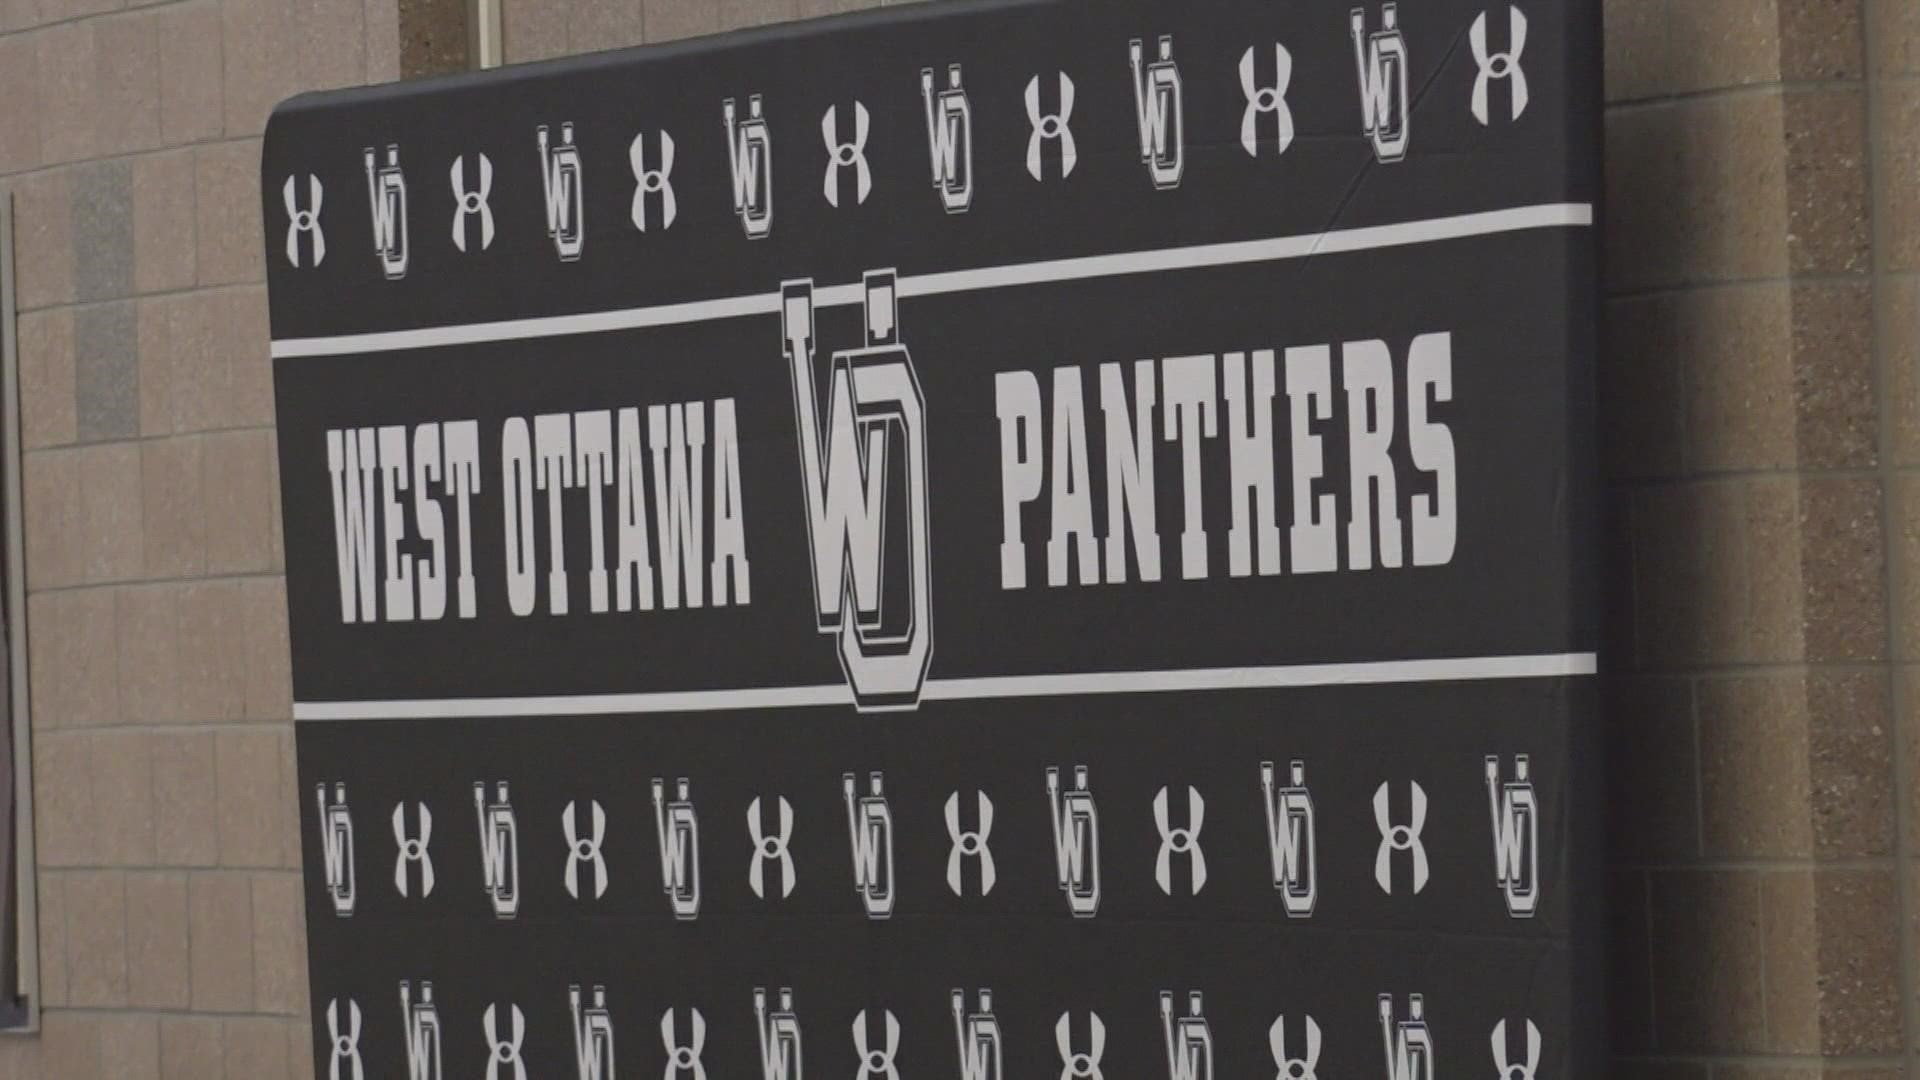 Leaders at West Ottawa Public Schools say they believe having school spirit is an important
part of feeling like they belong to the school community.